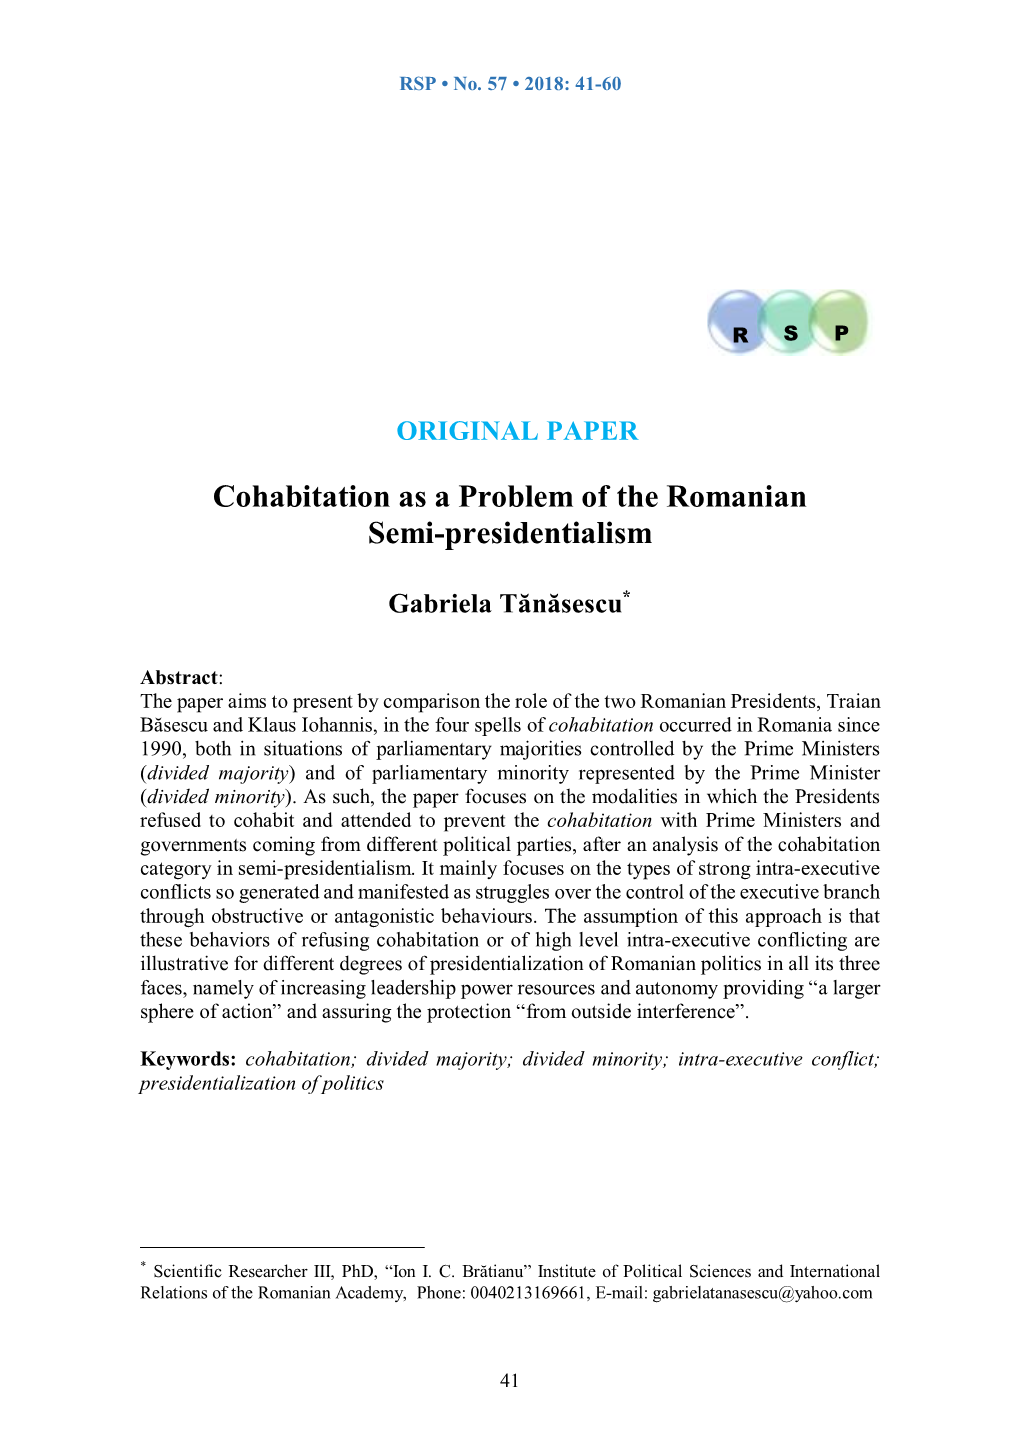 Cohabitation As a Problem of the Romanian Semi-Presidentialism